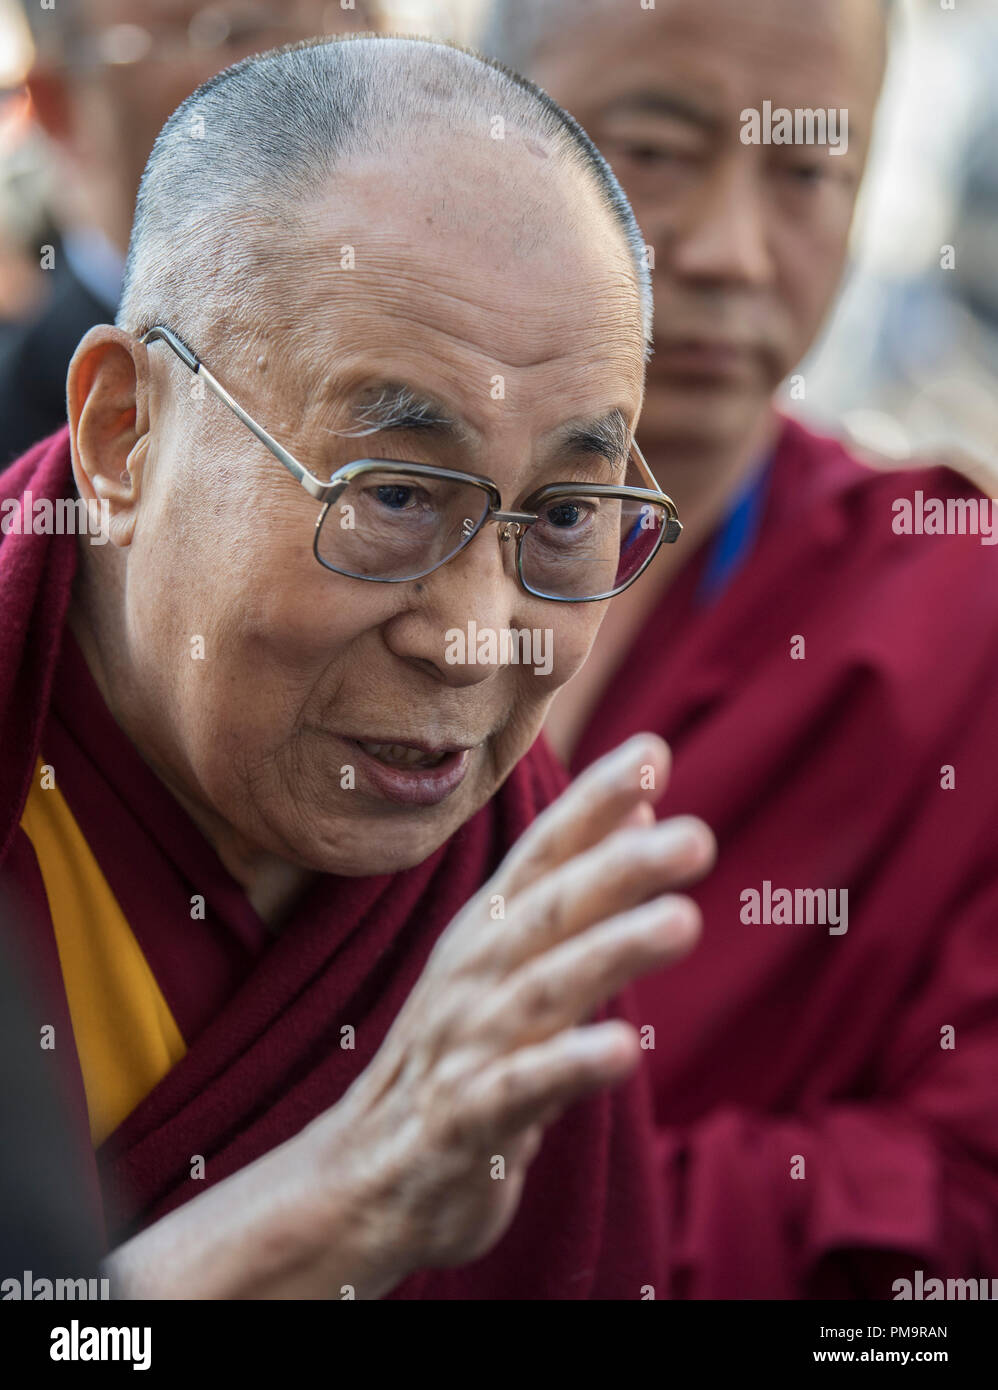 The spiritual leader Dalai Lama gives a speech to festival goers at the  Stone Circle, Glastonbury Festival, at Worthy Farm in Somerset, England, as  a special guest of the festival, Sunday June